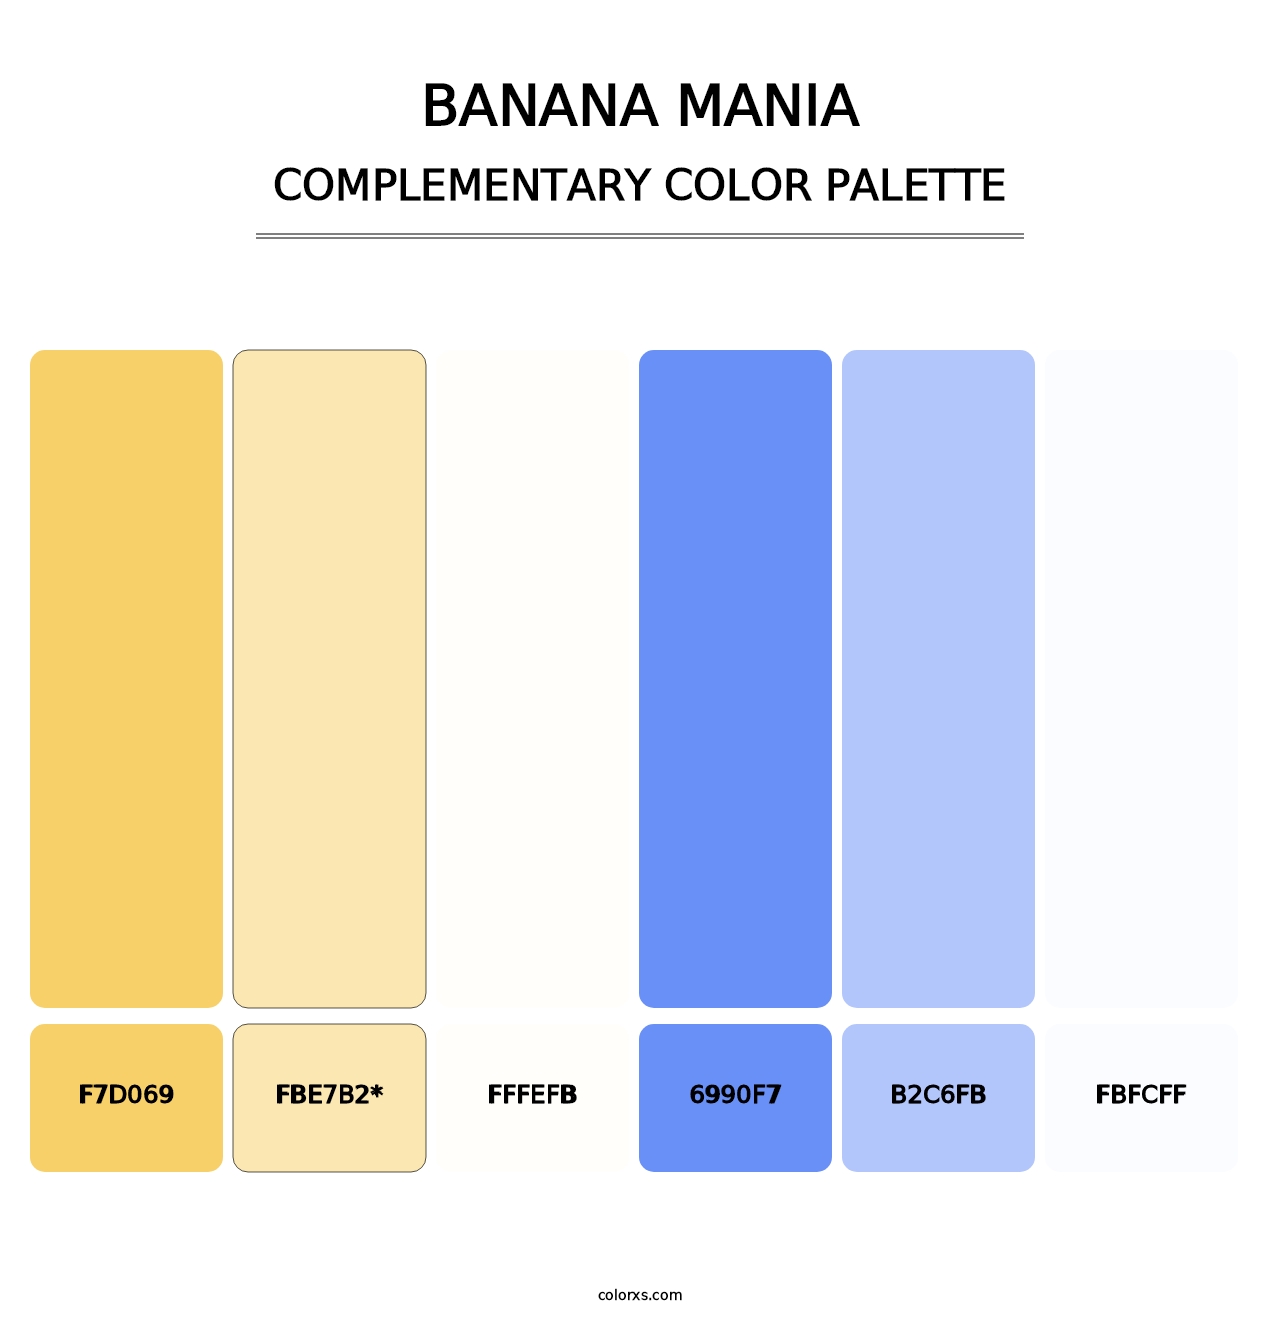 Banana Mania - Complementary Color Palette